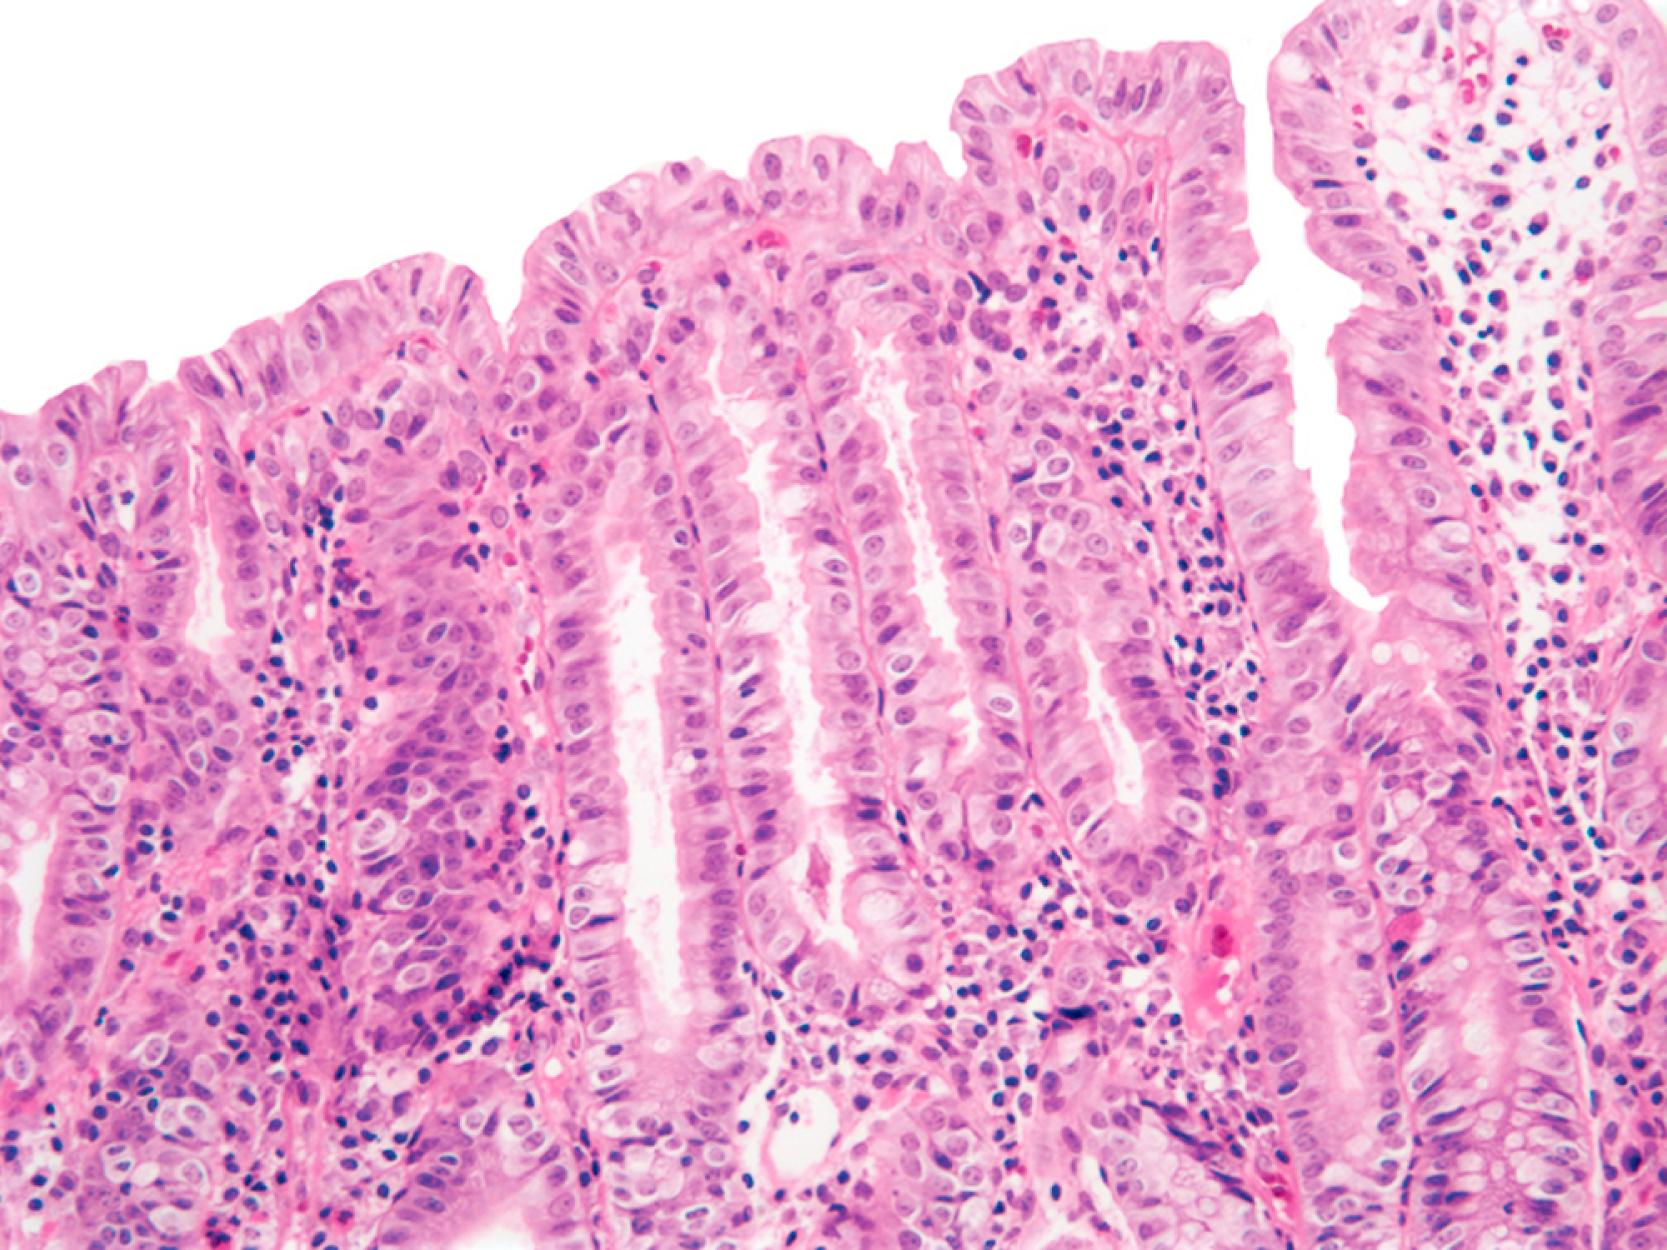 FIGURE 4.9, Villous fusion, surface reactive and degenerative changes, and mononuclear cell infiltrates are nonspecific features that can be seen in biopsies from patients with gastroenteritis caused by enteric viruses.